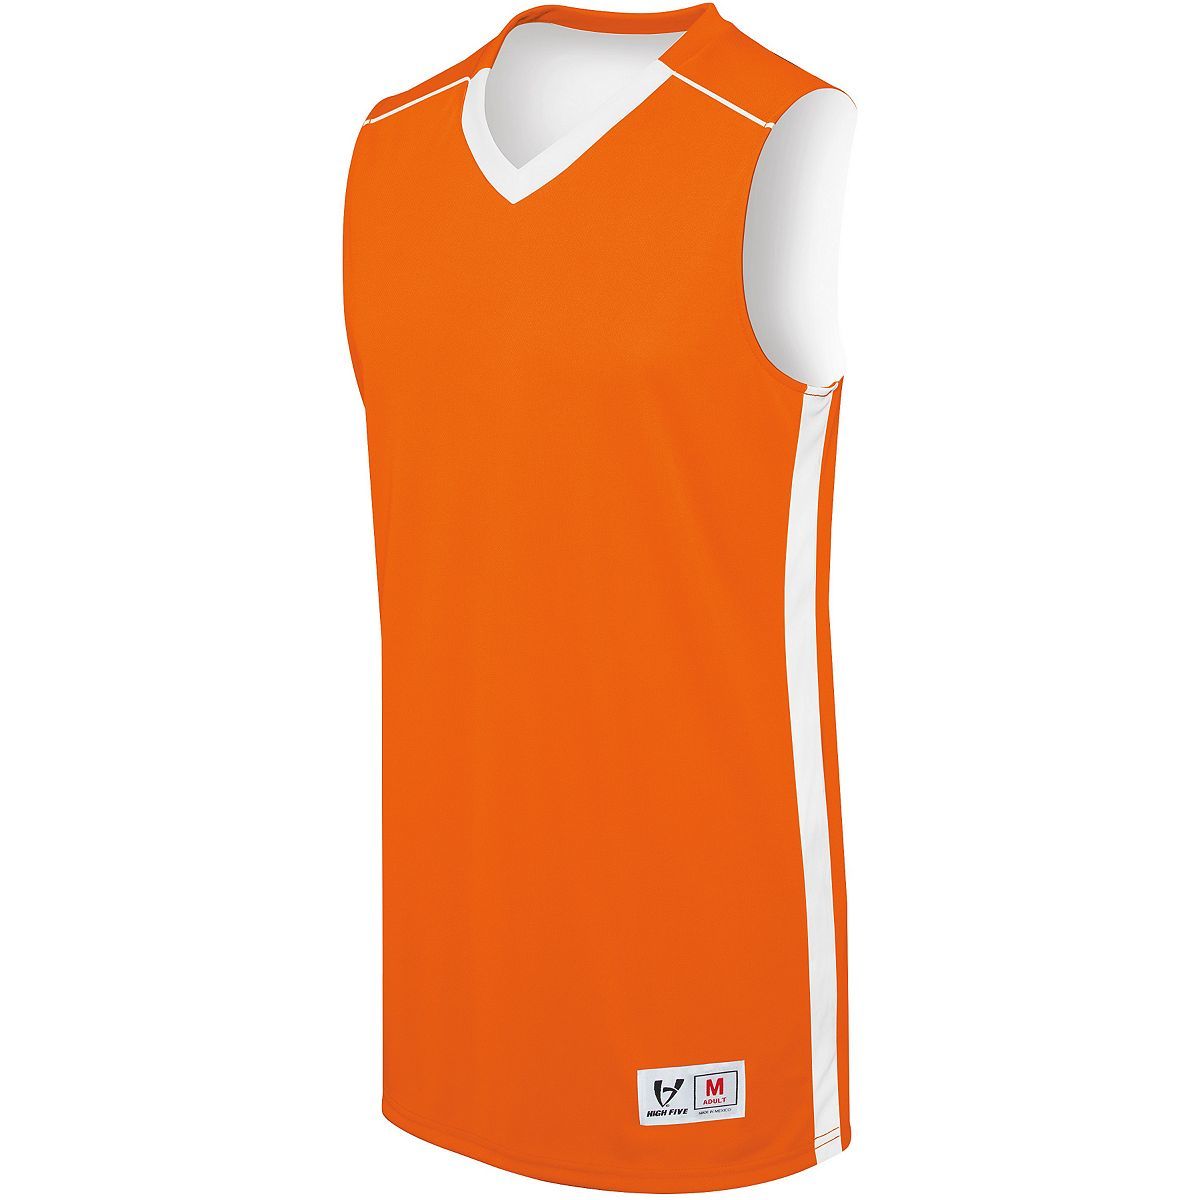 Augusta Sportswear Youth Competition Reversible Jersey in Orange/White  -Part of the Youth, Youth-Jersey, Augusta-Products, Basketball, Shirts, All-Sports, All-Sports-1 product lines at KanaleyCreations.com